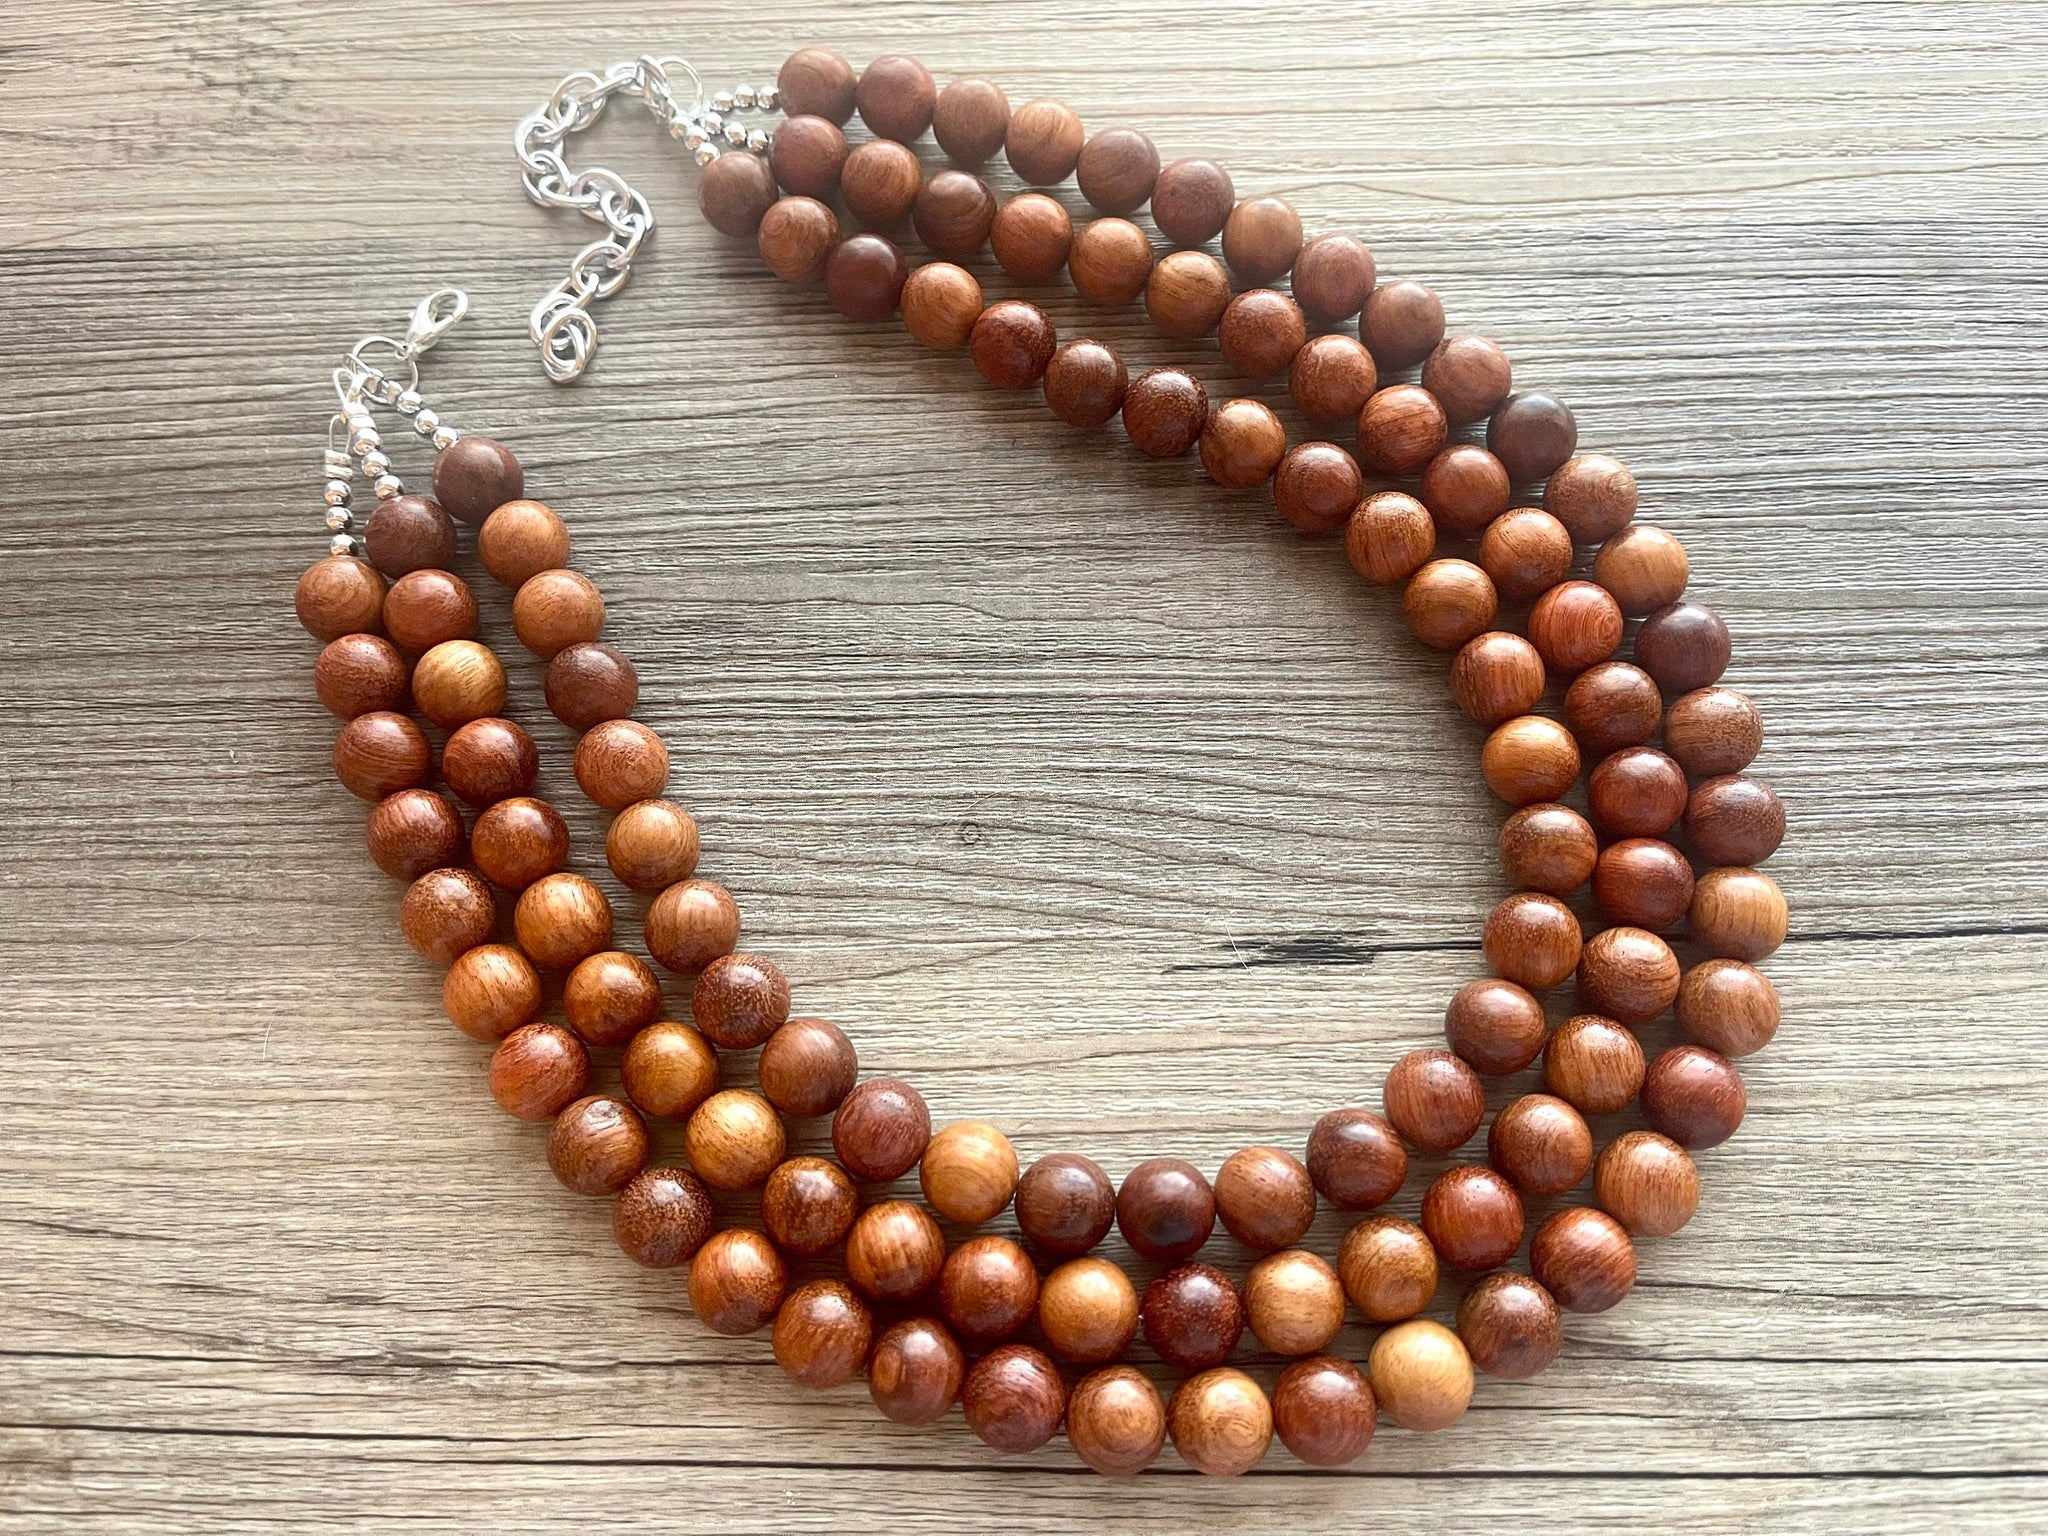 Big Beads Wooden Necklaces, Wood Bead Chunky Chain